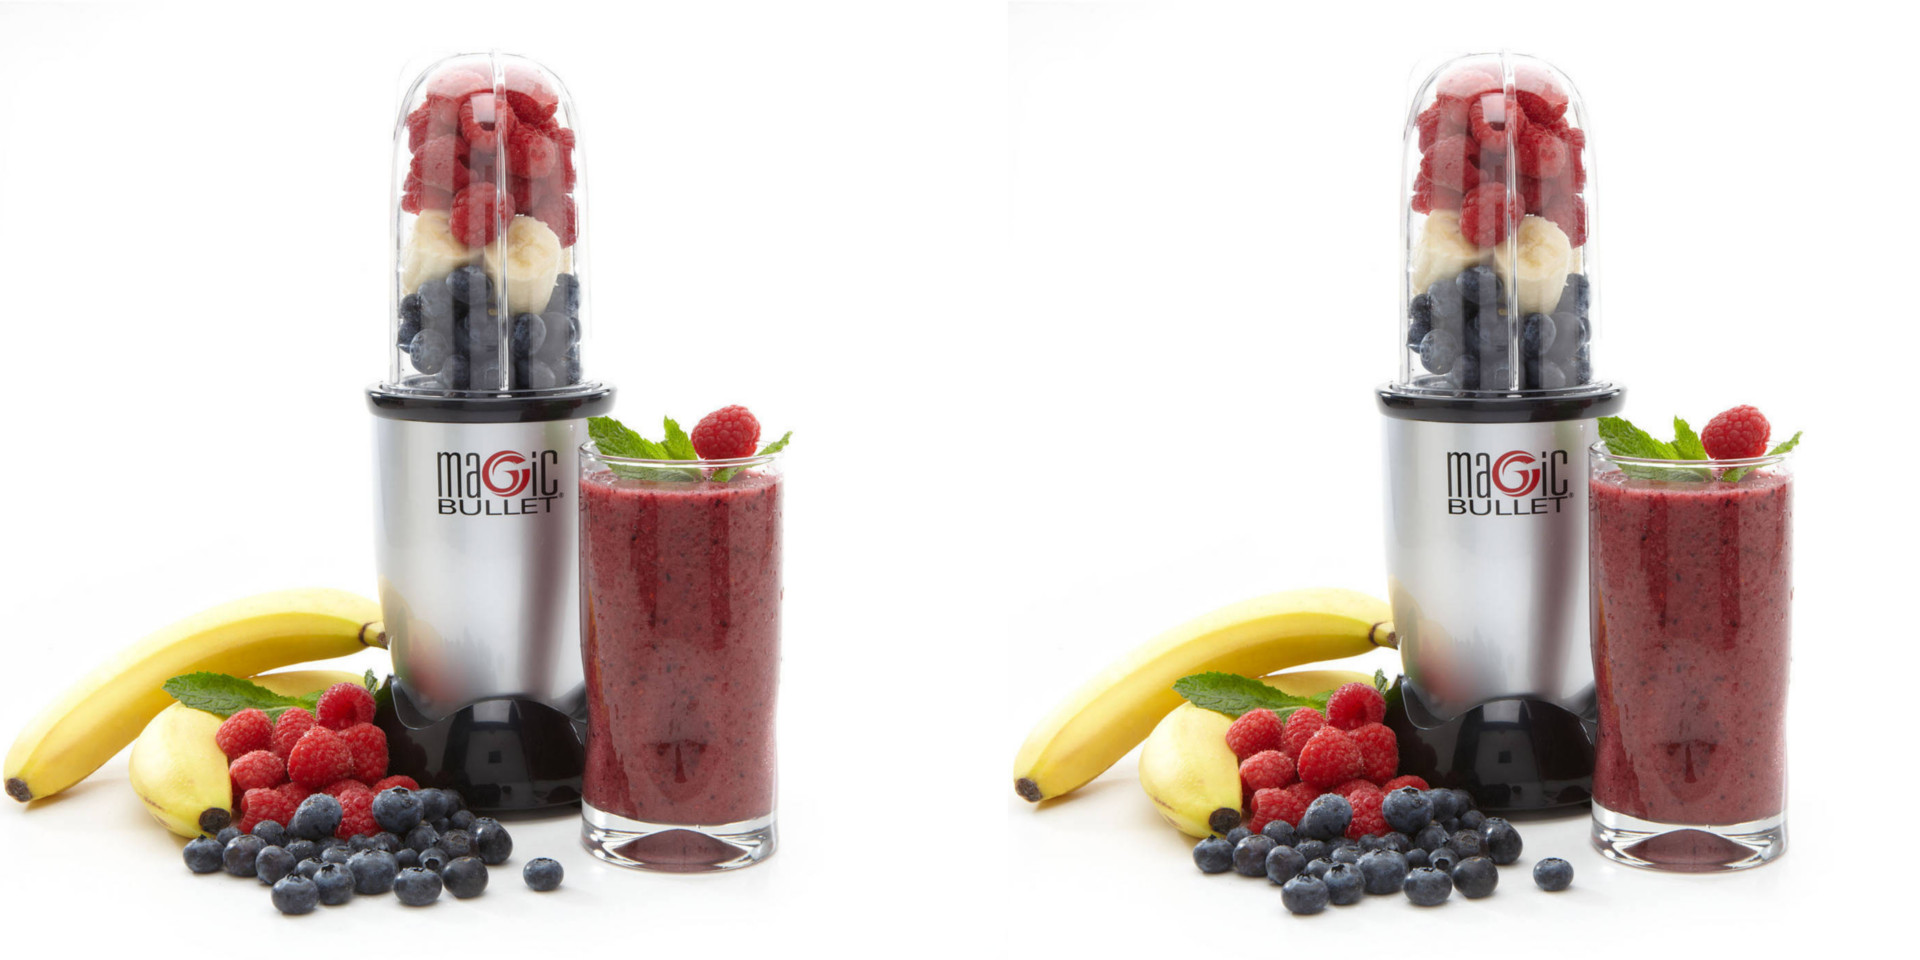 Magic Bullet Blender is the perfect smoothie maker at $20 ...